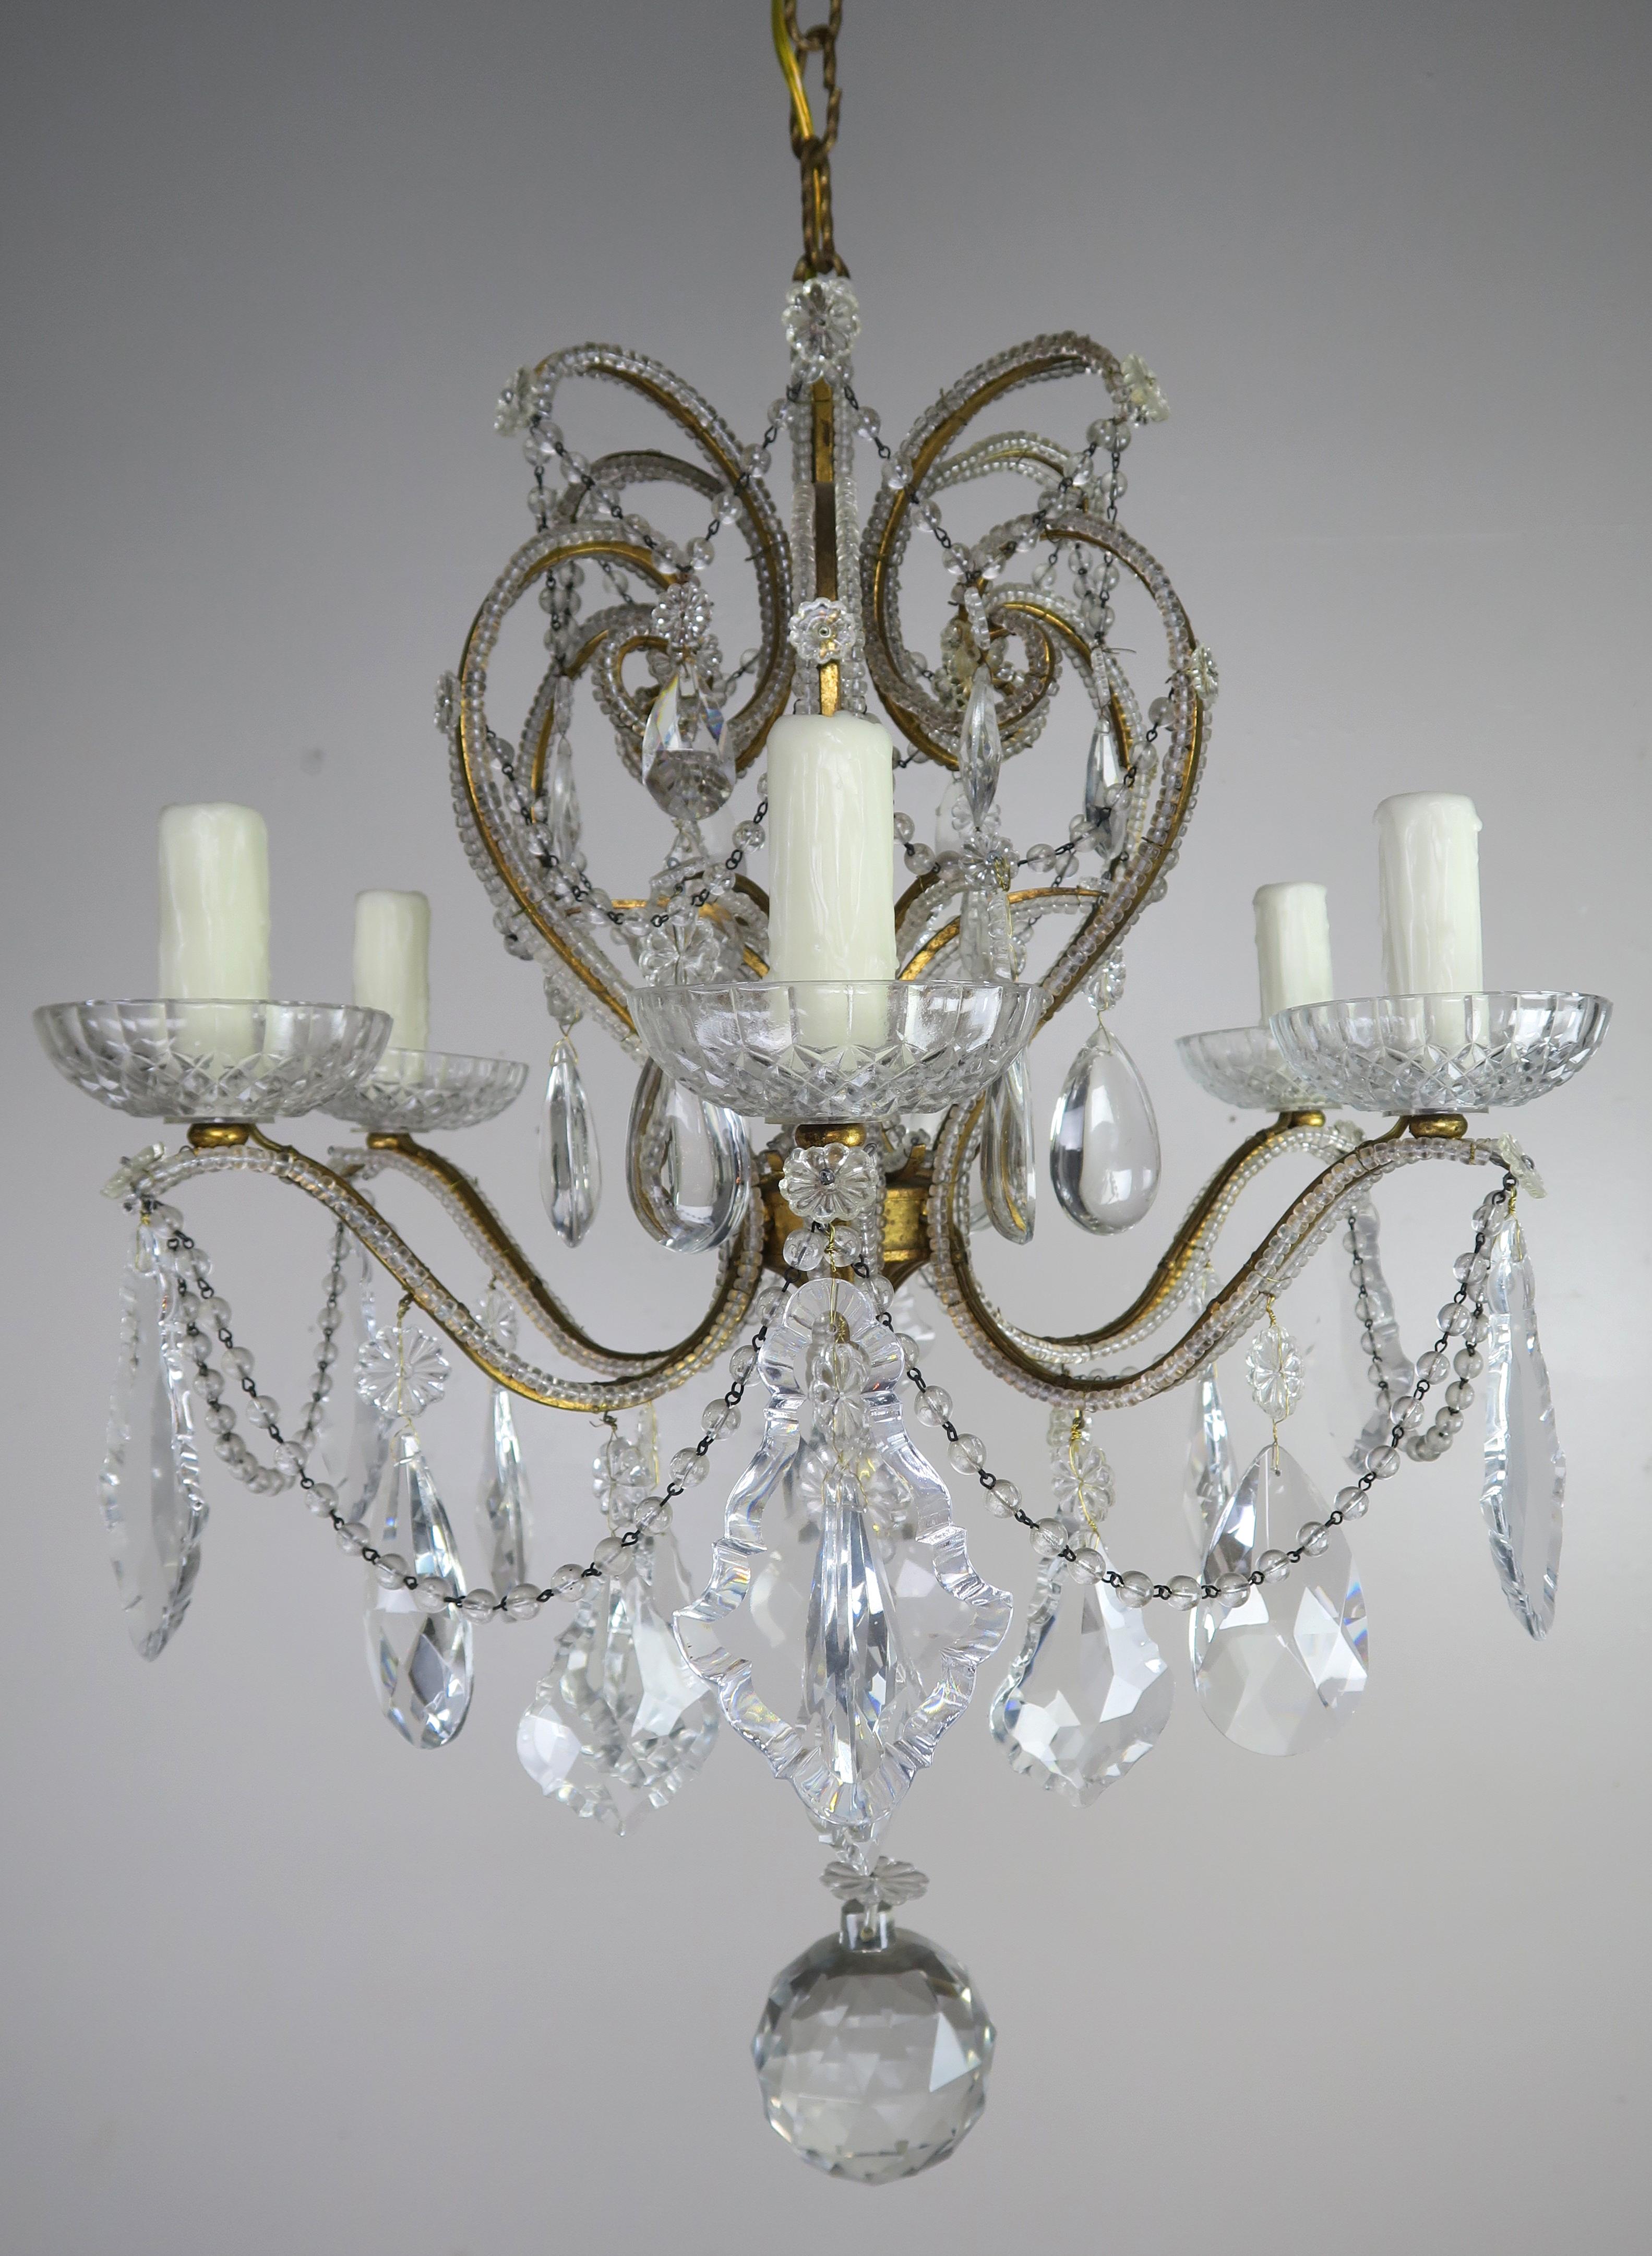 (8) light Italian crystal gilt brass chandelier. The light fixture is adorned with pendulum and almond shaped crystals with garlands of English cut beads throughout. There is a 4